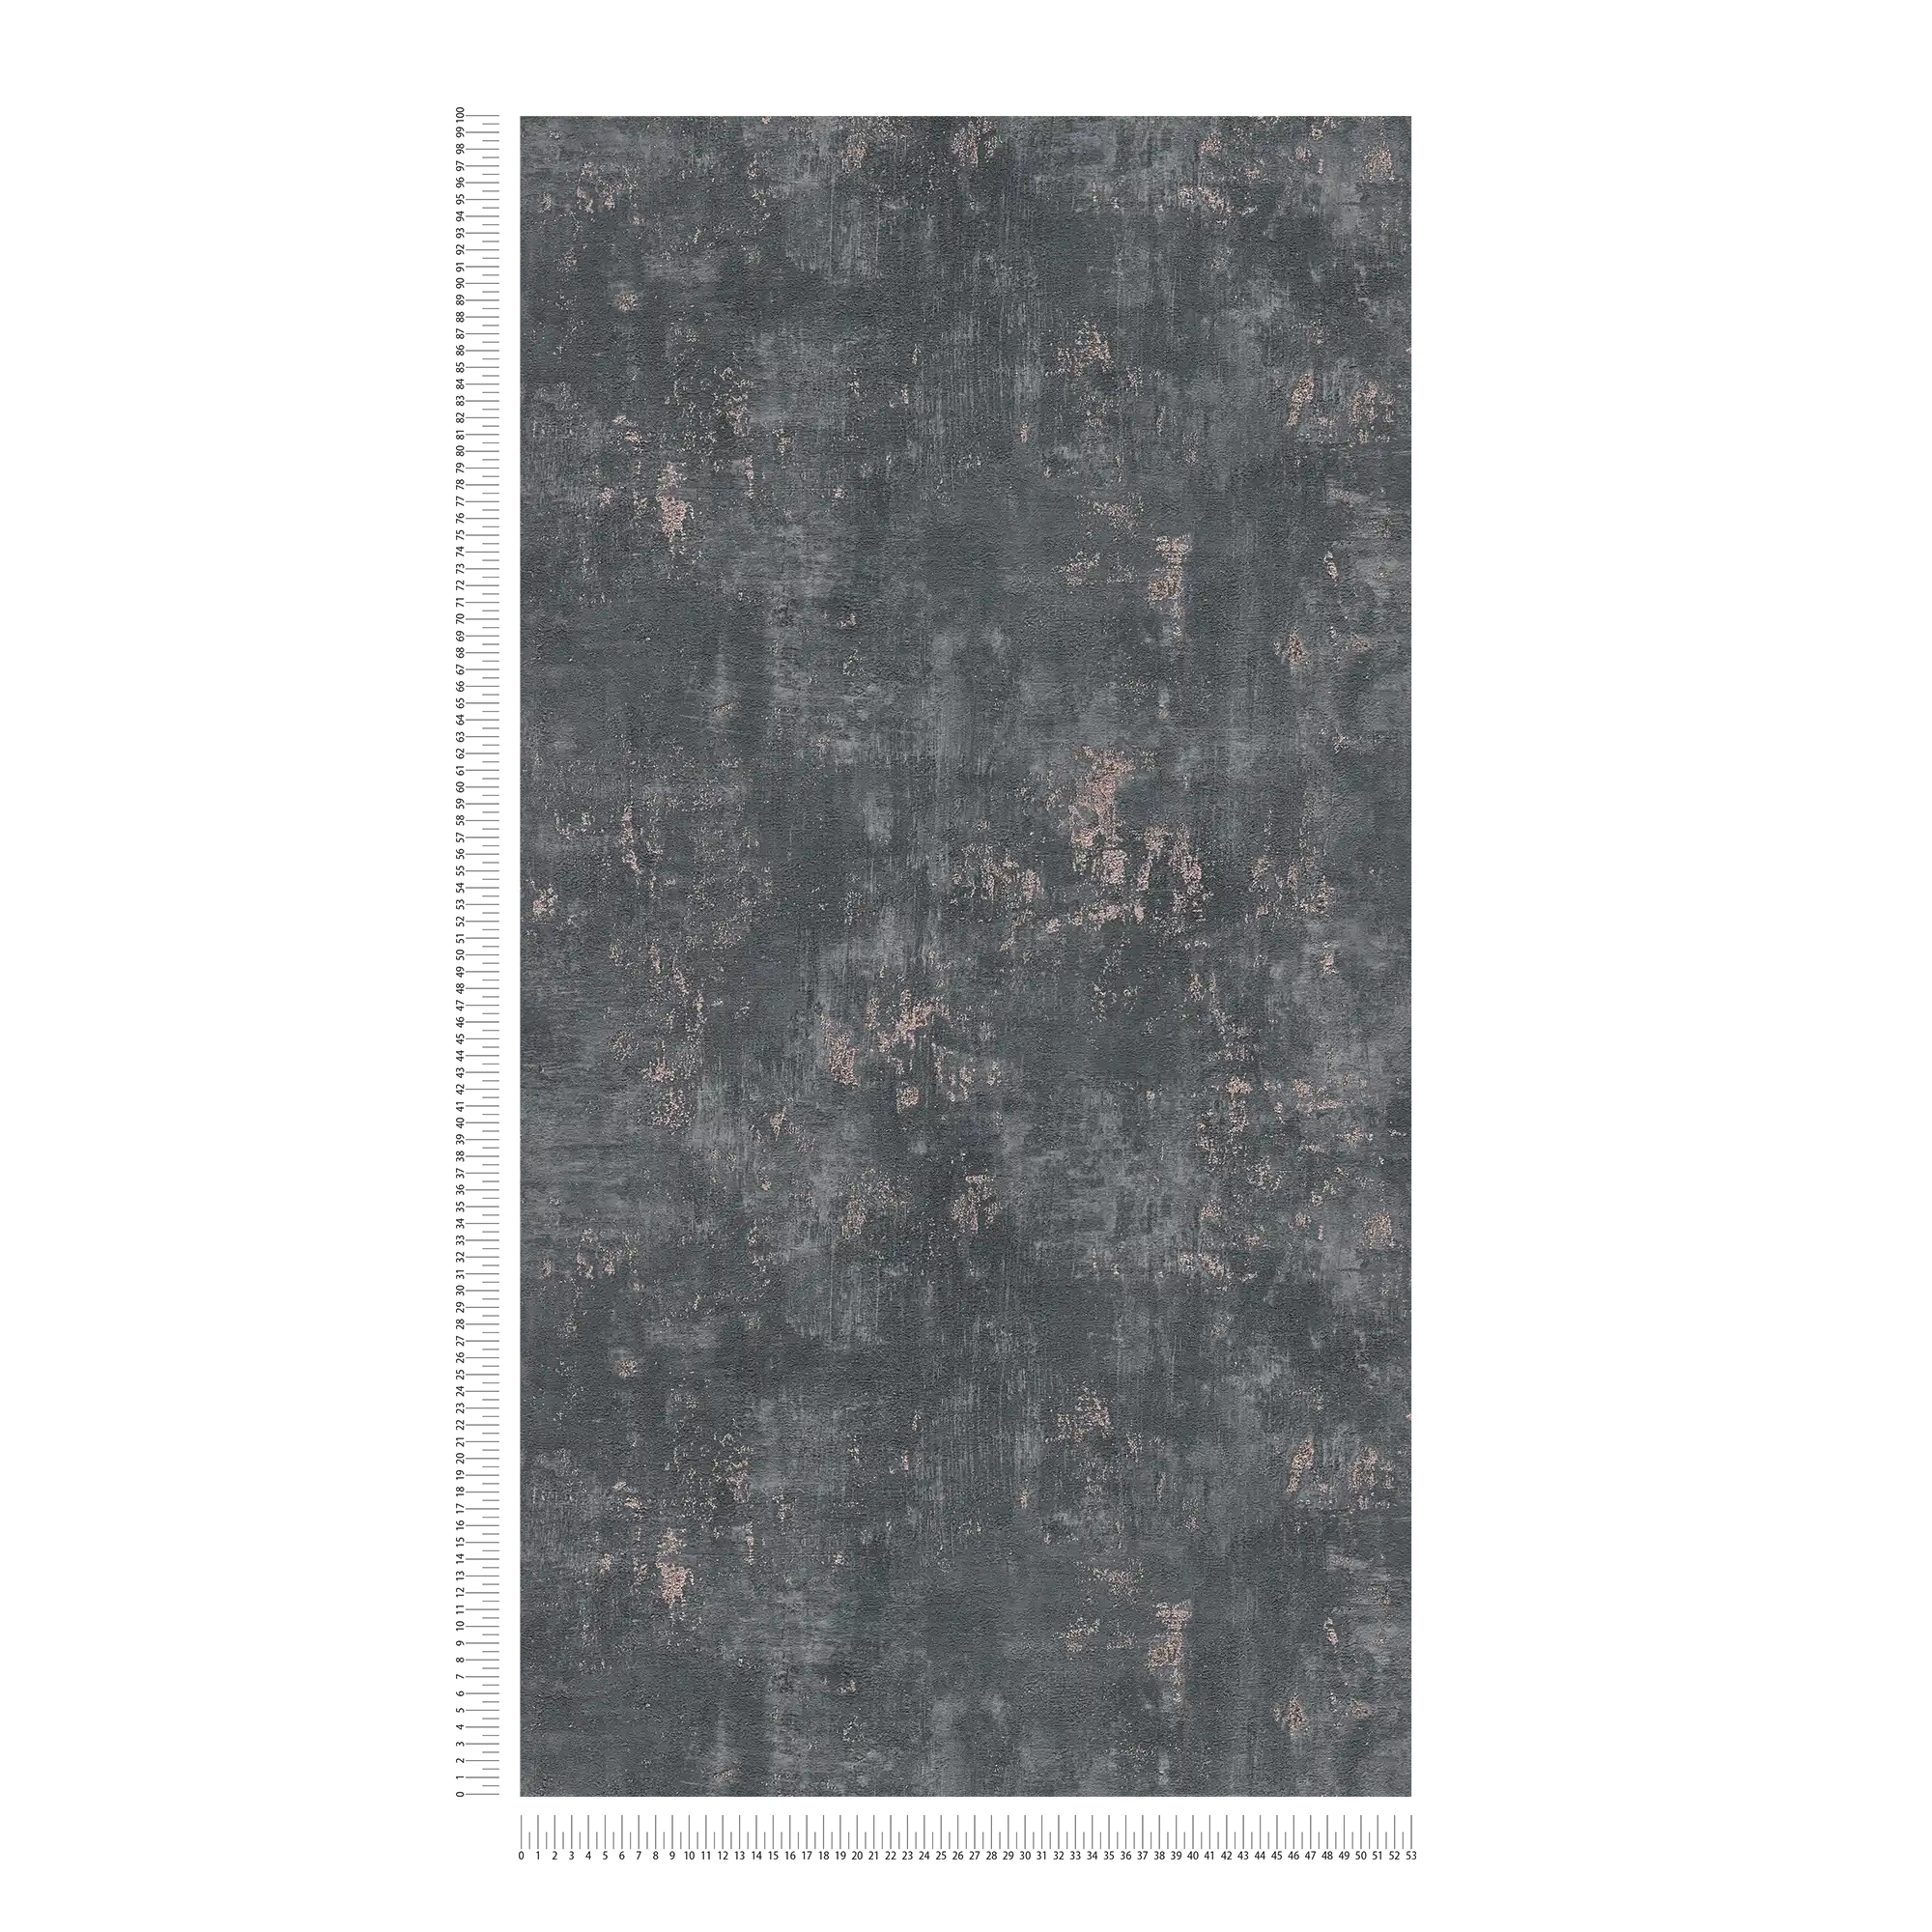             Used look wallpaper with metallic accents - black, rose gold
        